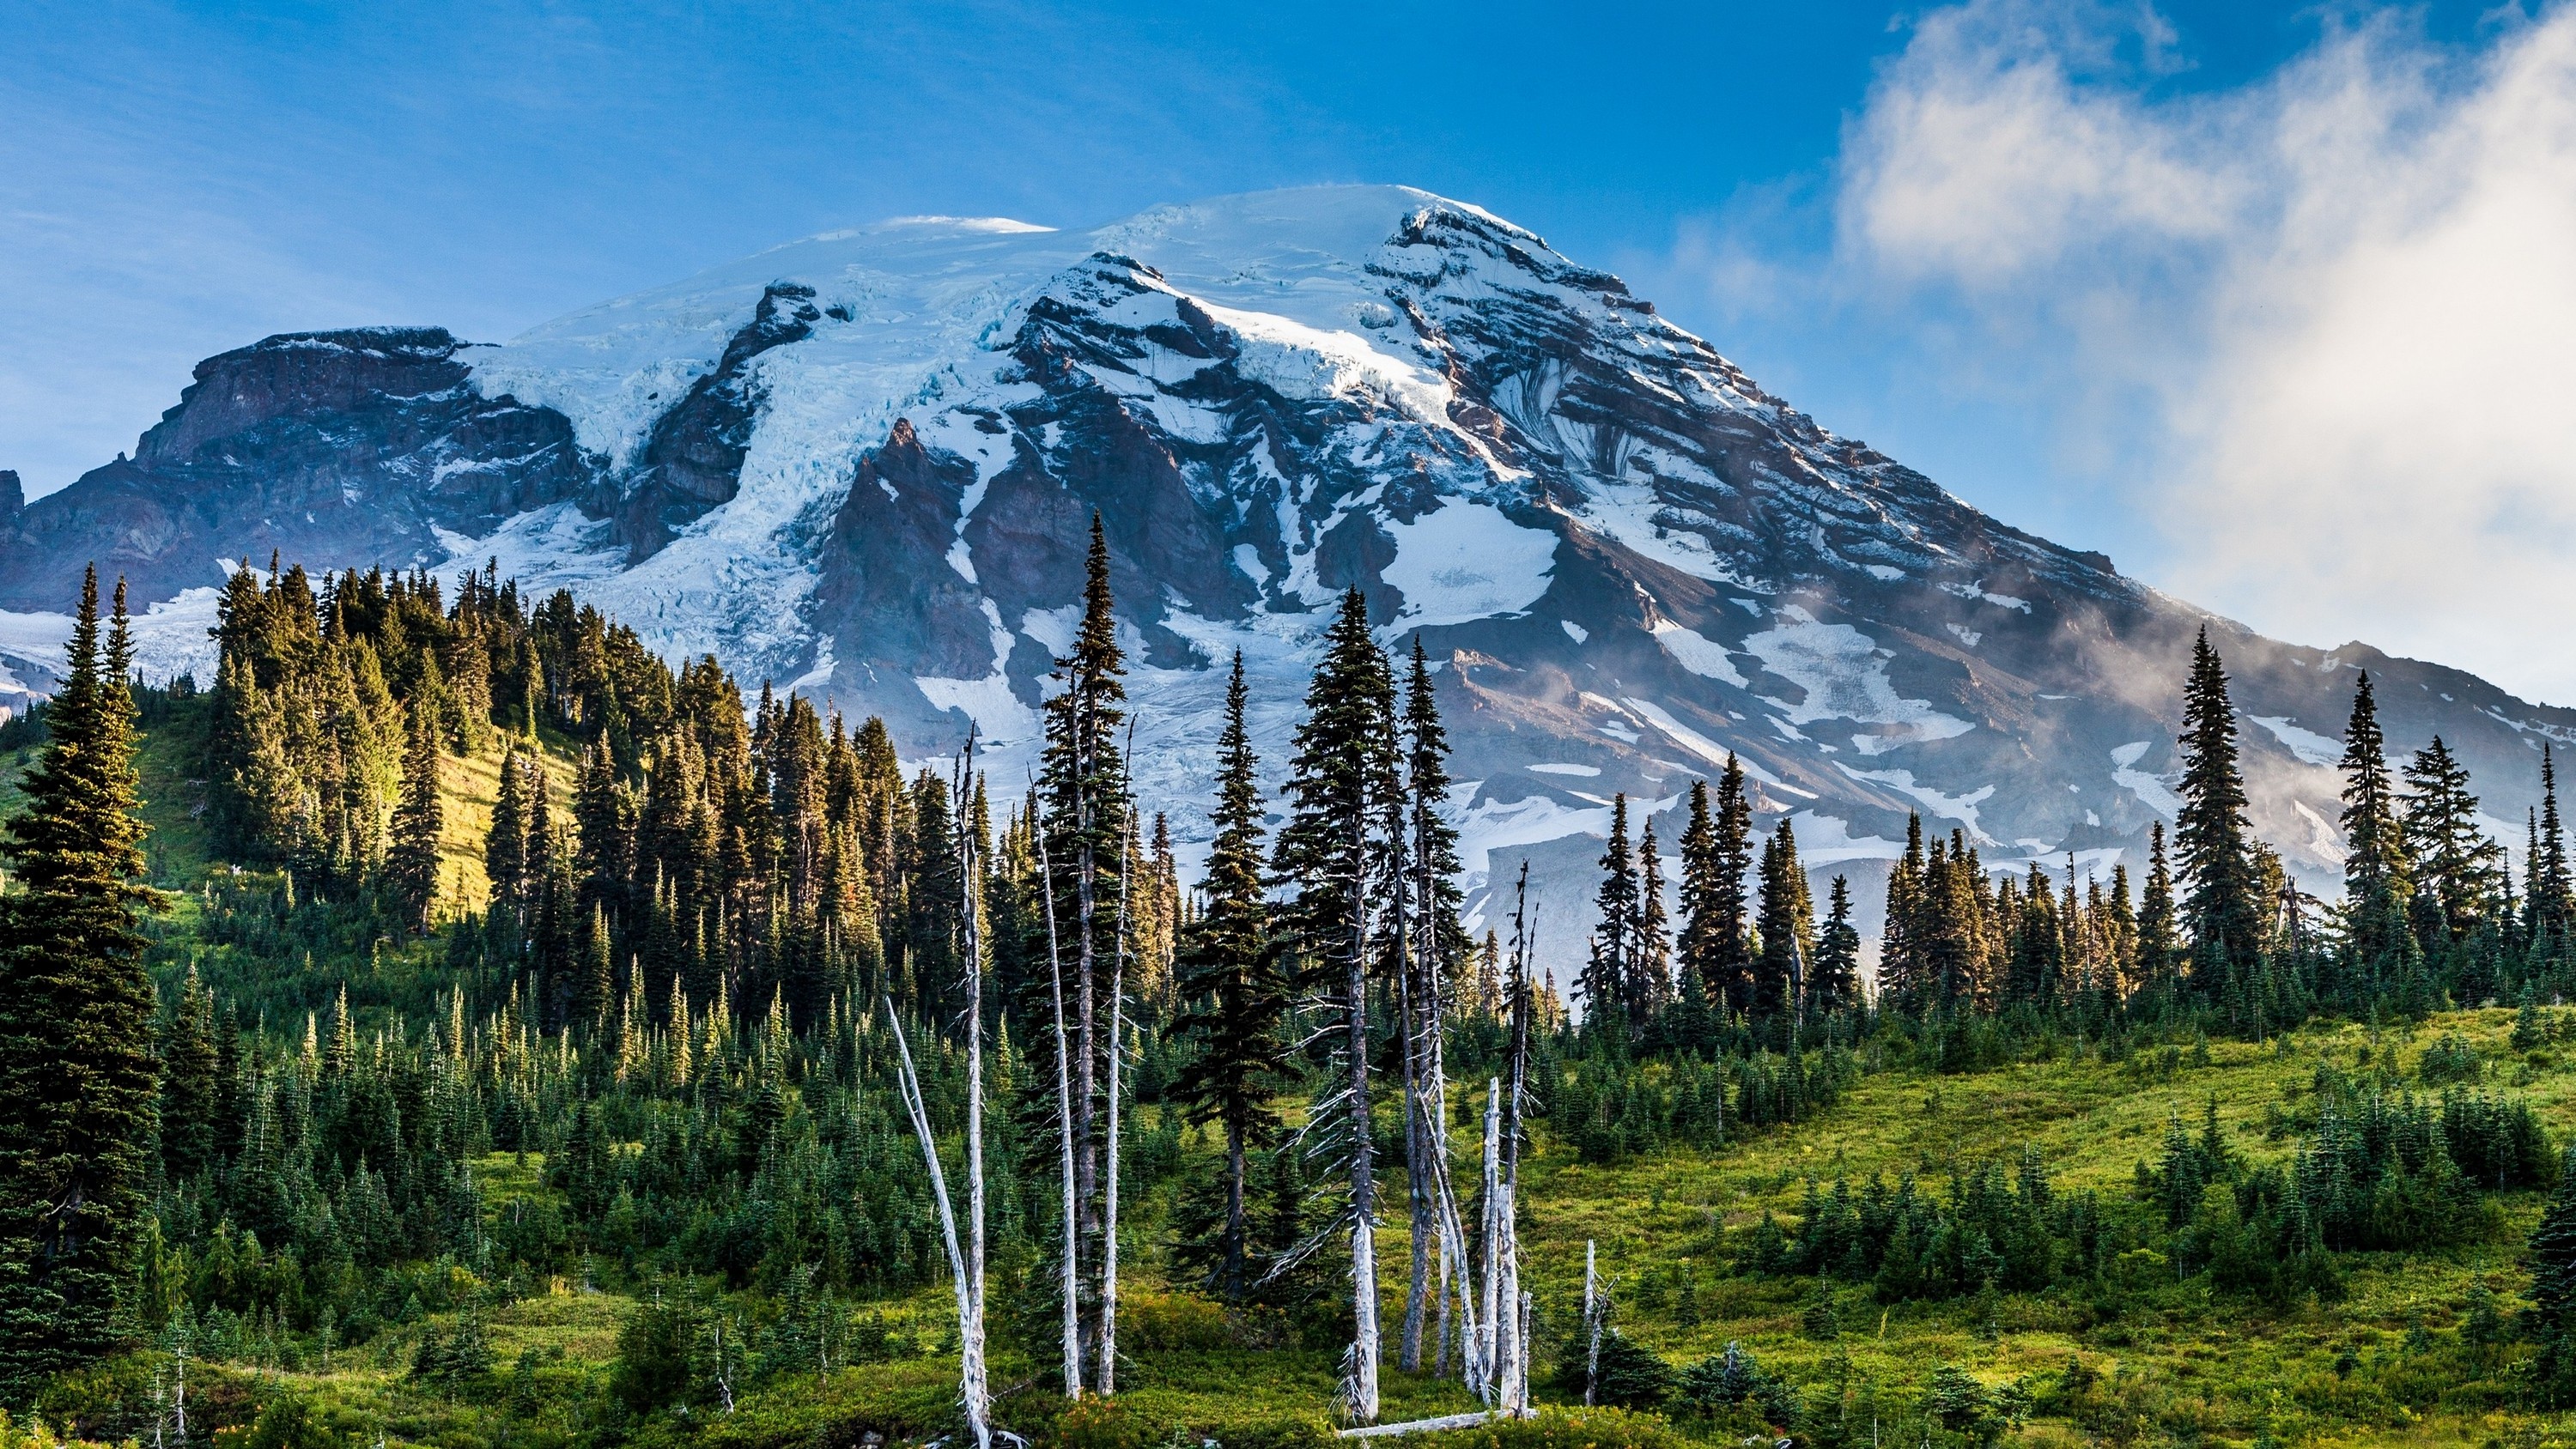 nature, Landscape, Mount Rainier, Washington State, Mountain, Snowy Peak, Forest, Grass, Trees, Clouds, USA, Pine Trees, HDR Wallpaper